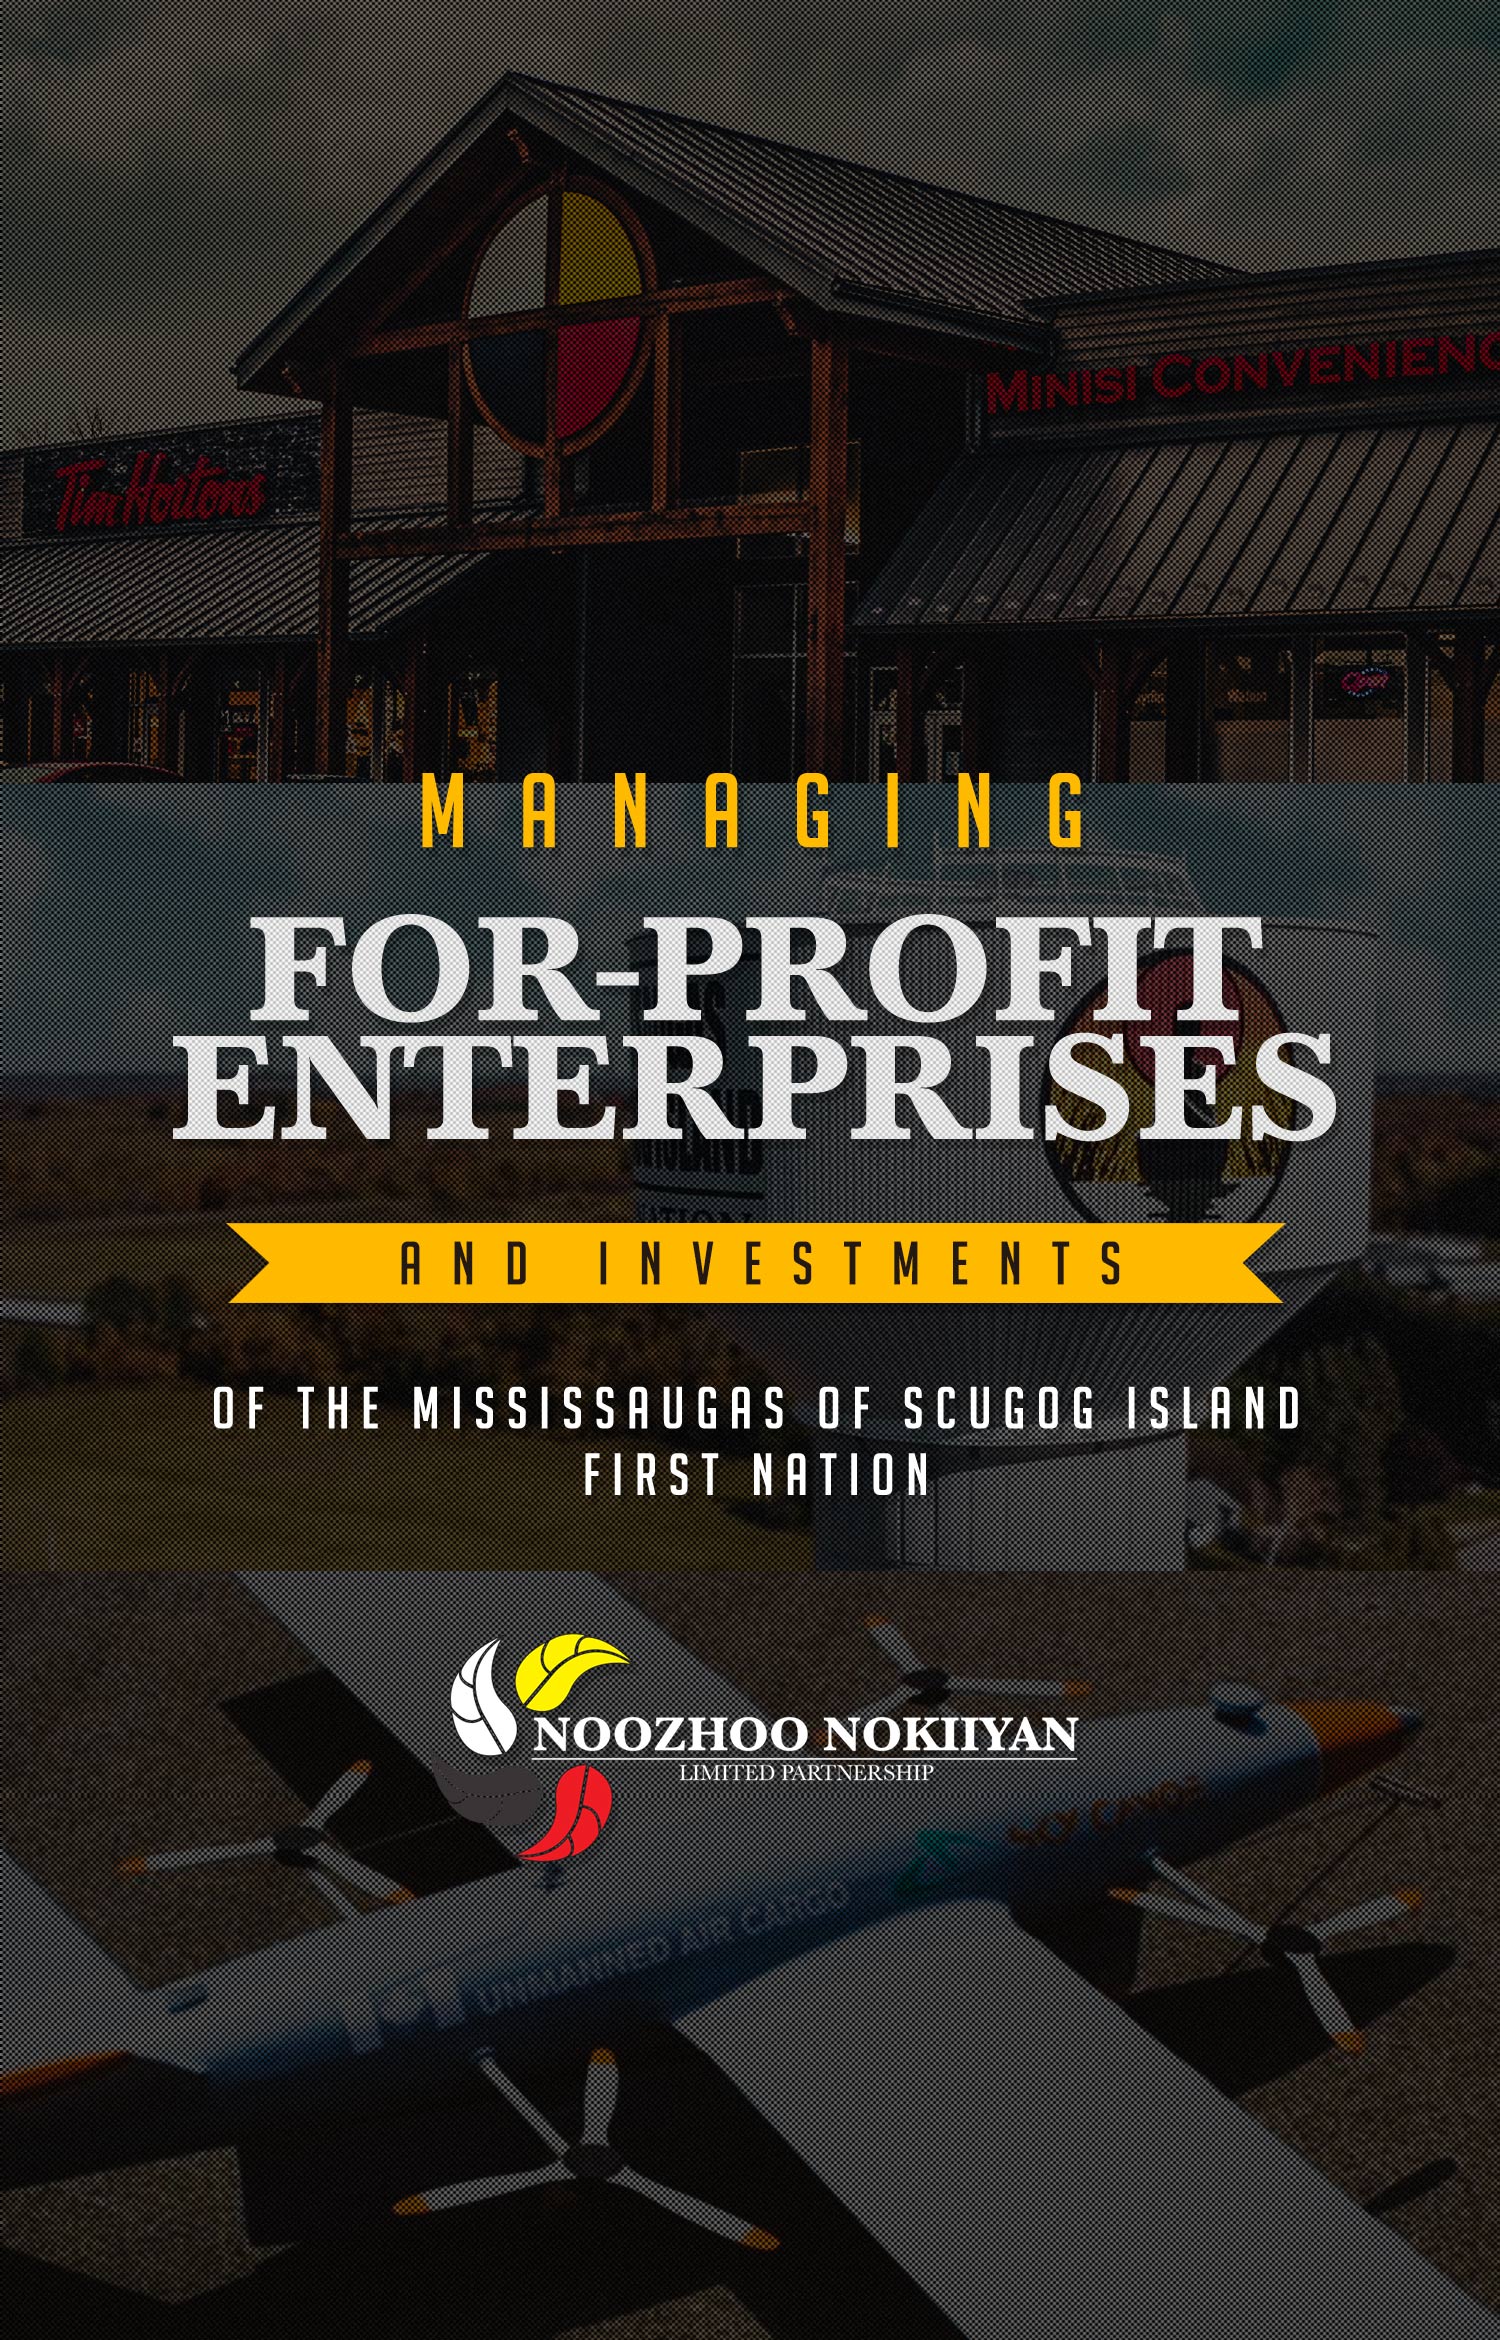 Managing the for-profit enterprises and investments of the Mississaugas of Scugog Island First Nation